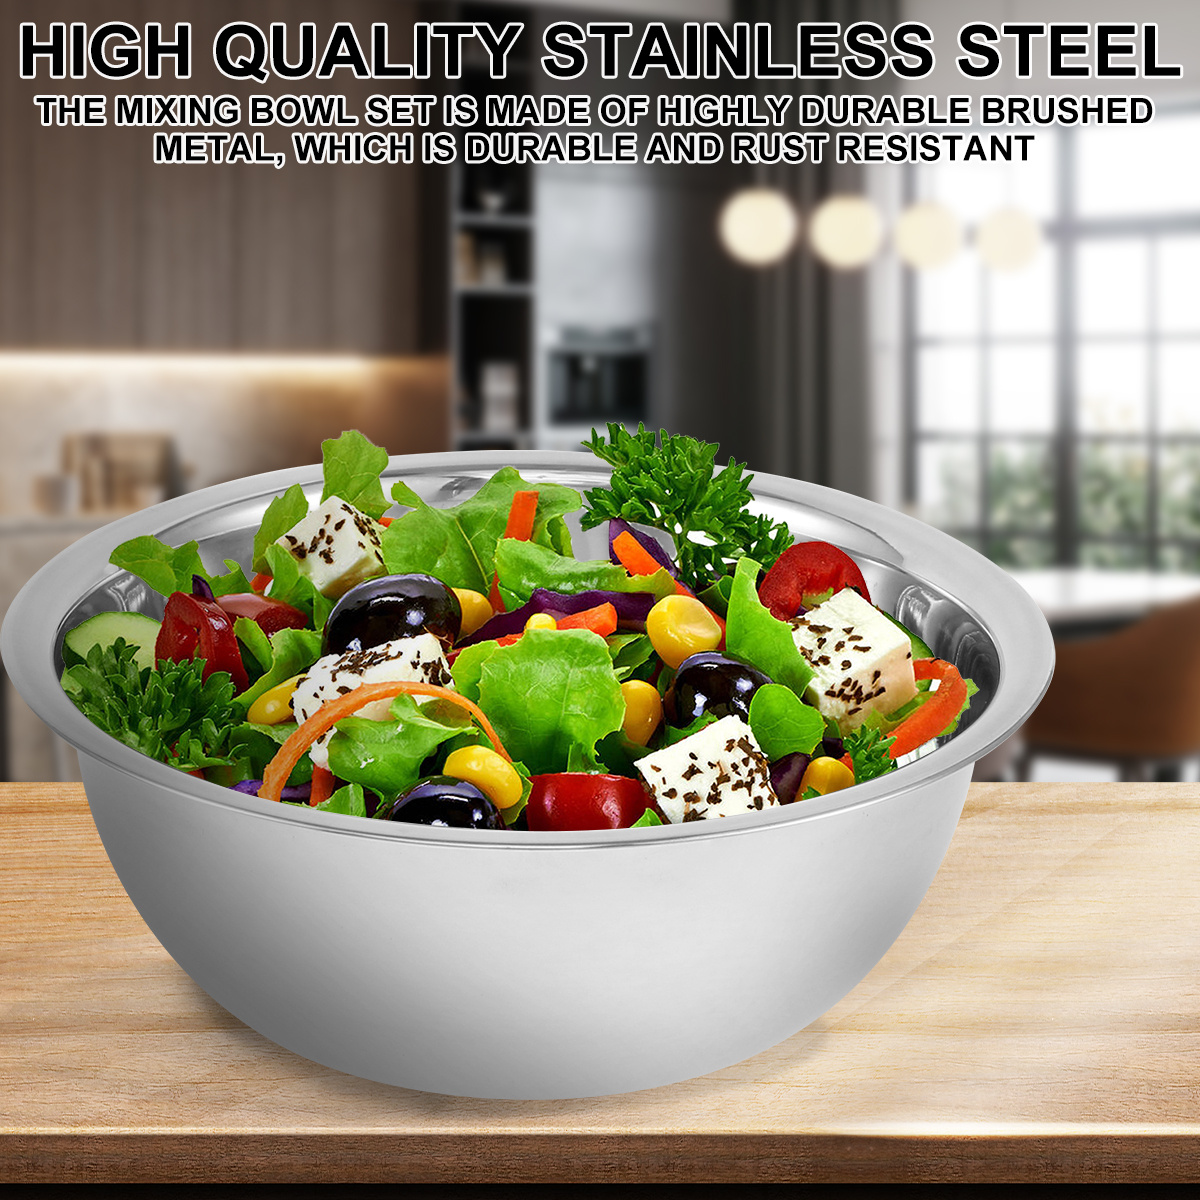 5pcs/set Stainless Steel Mixing Bowl With Scale Kitchen Cooking Salad Bowls  Non Slip Vegetable Food Storage Container